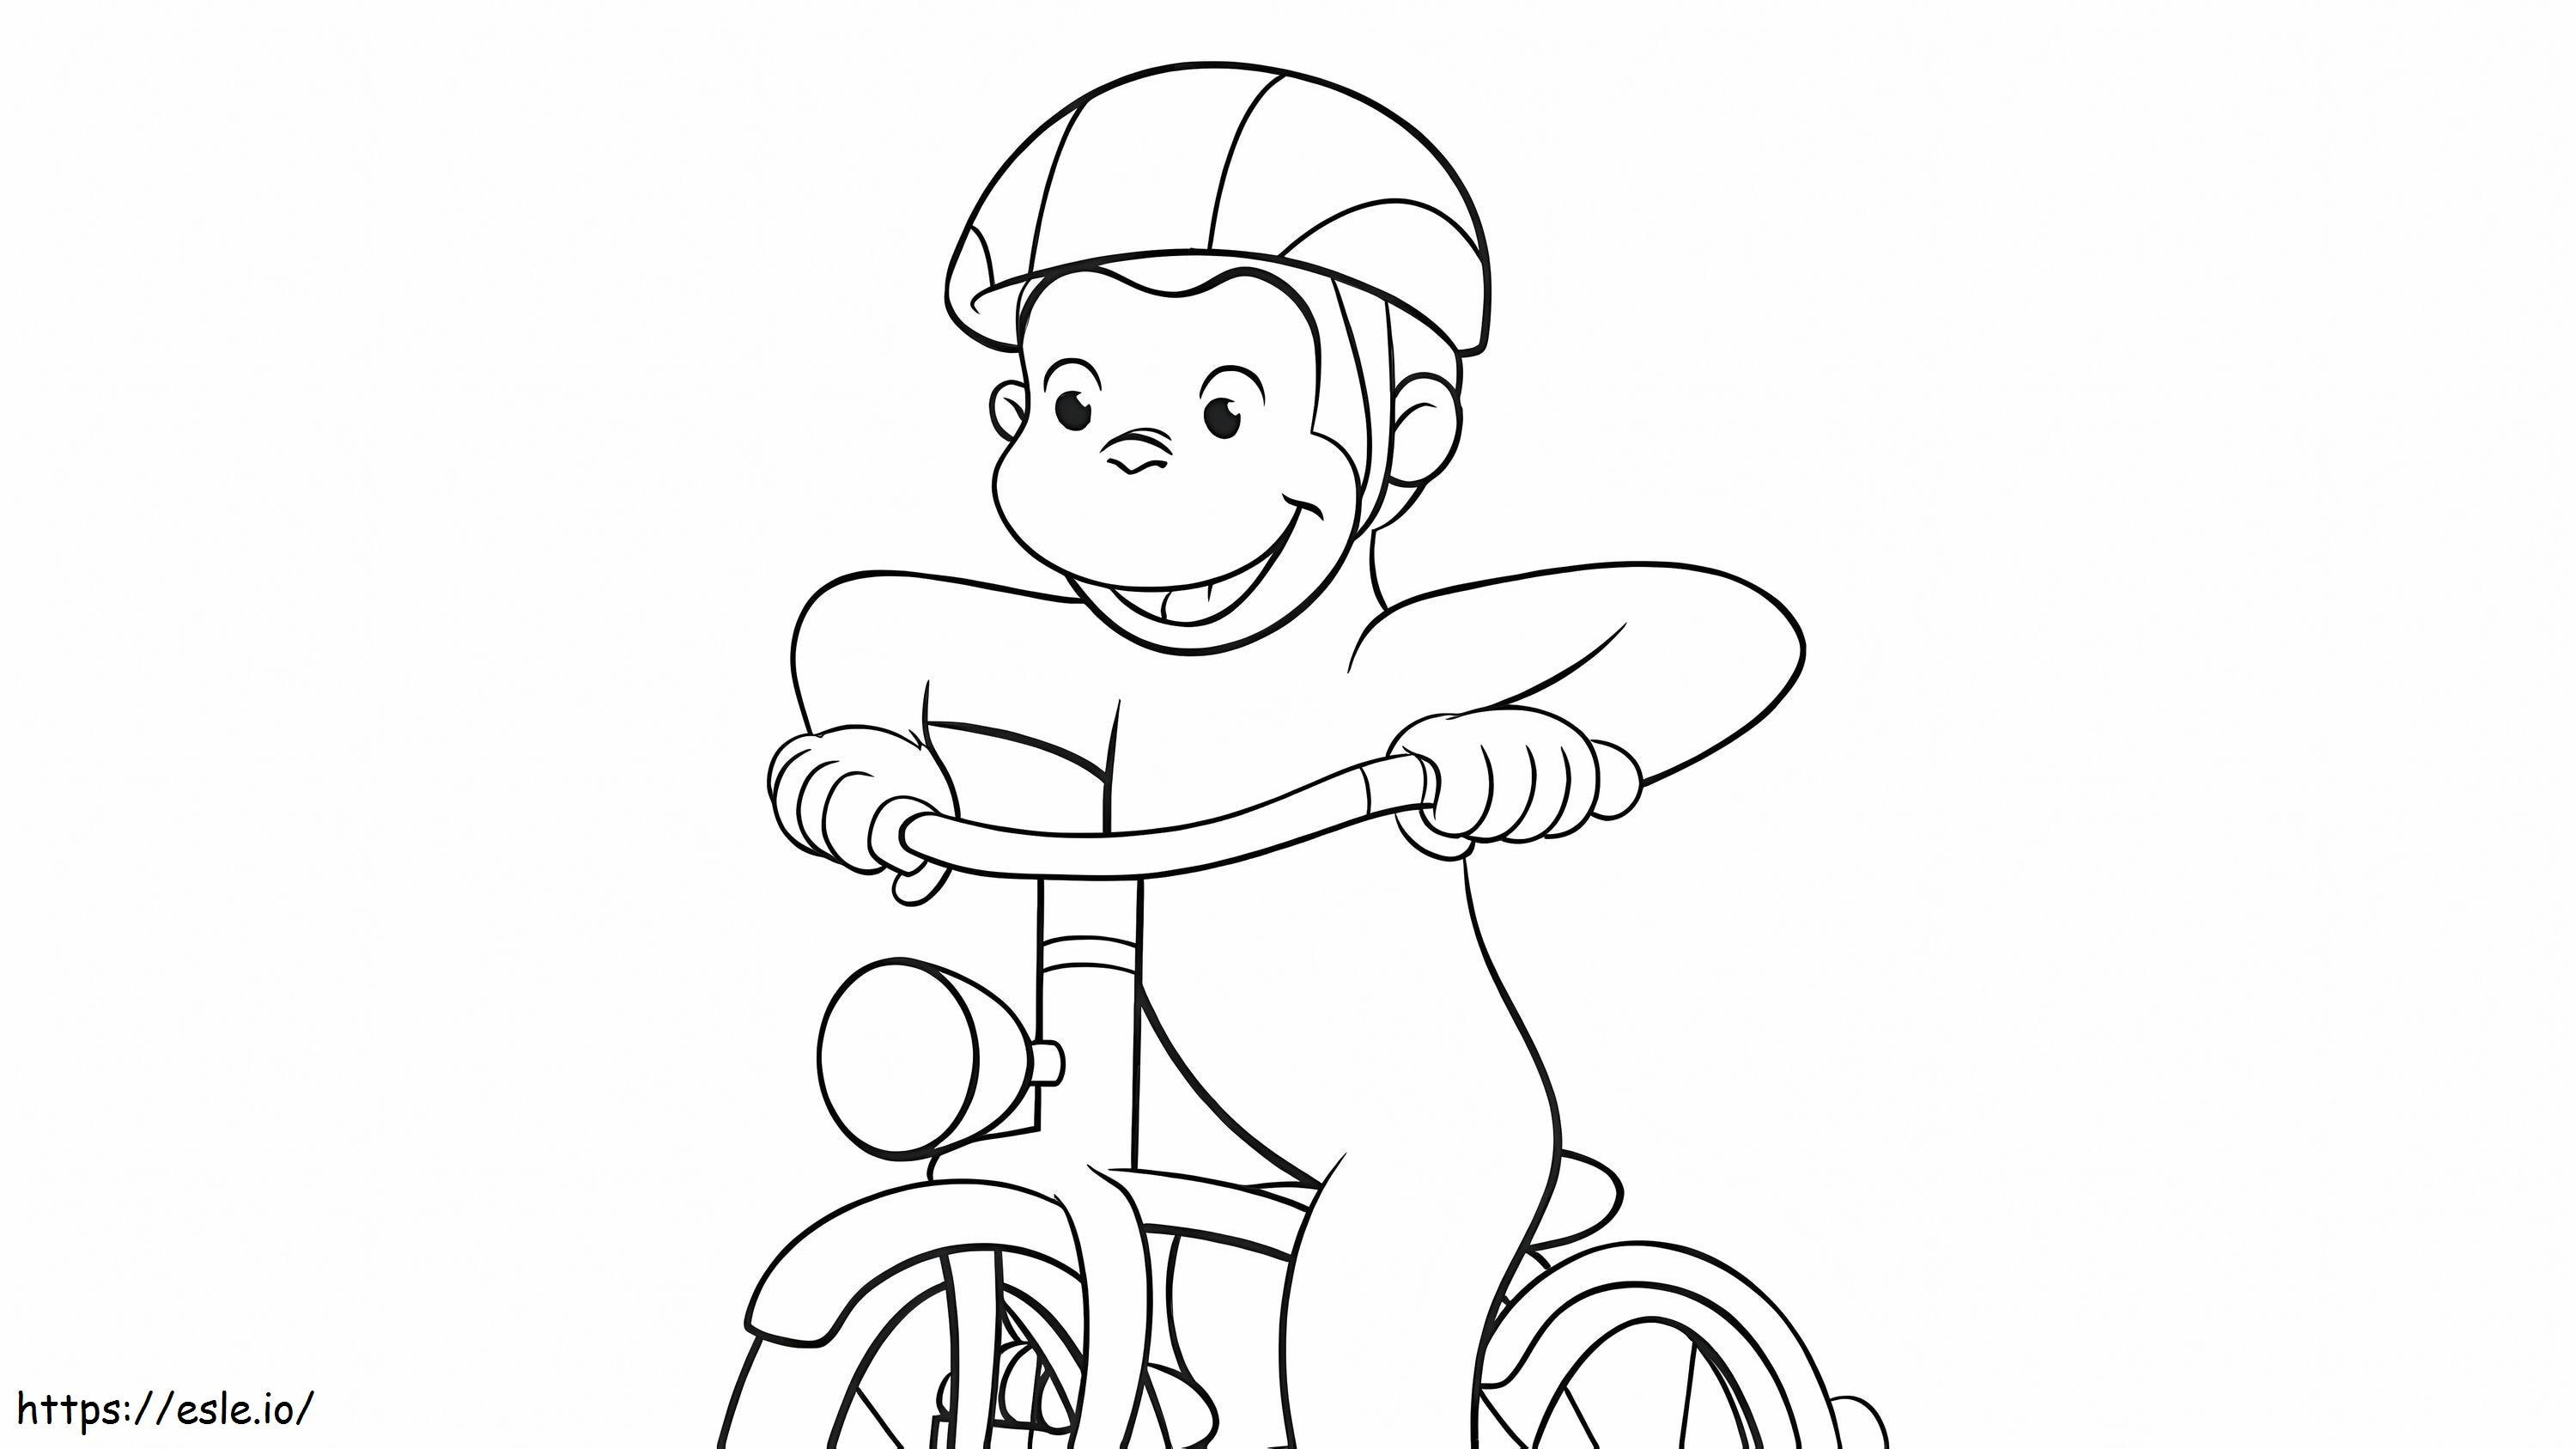 Monkey Riding Bicycle coloring page